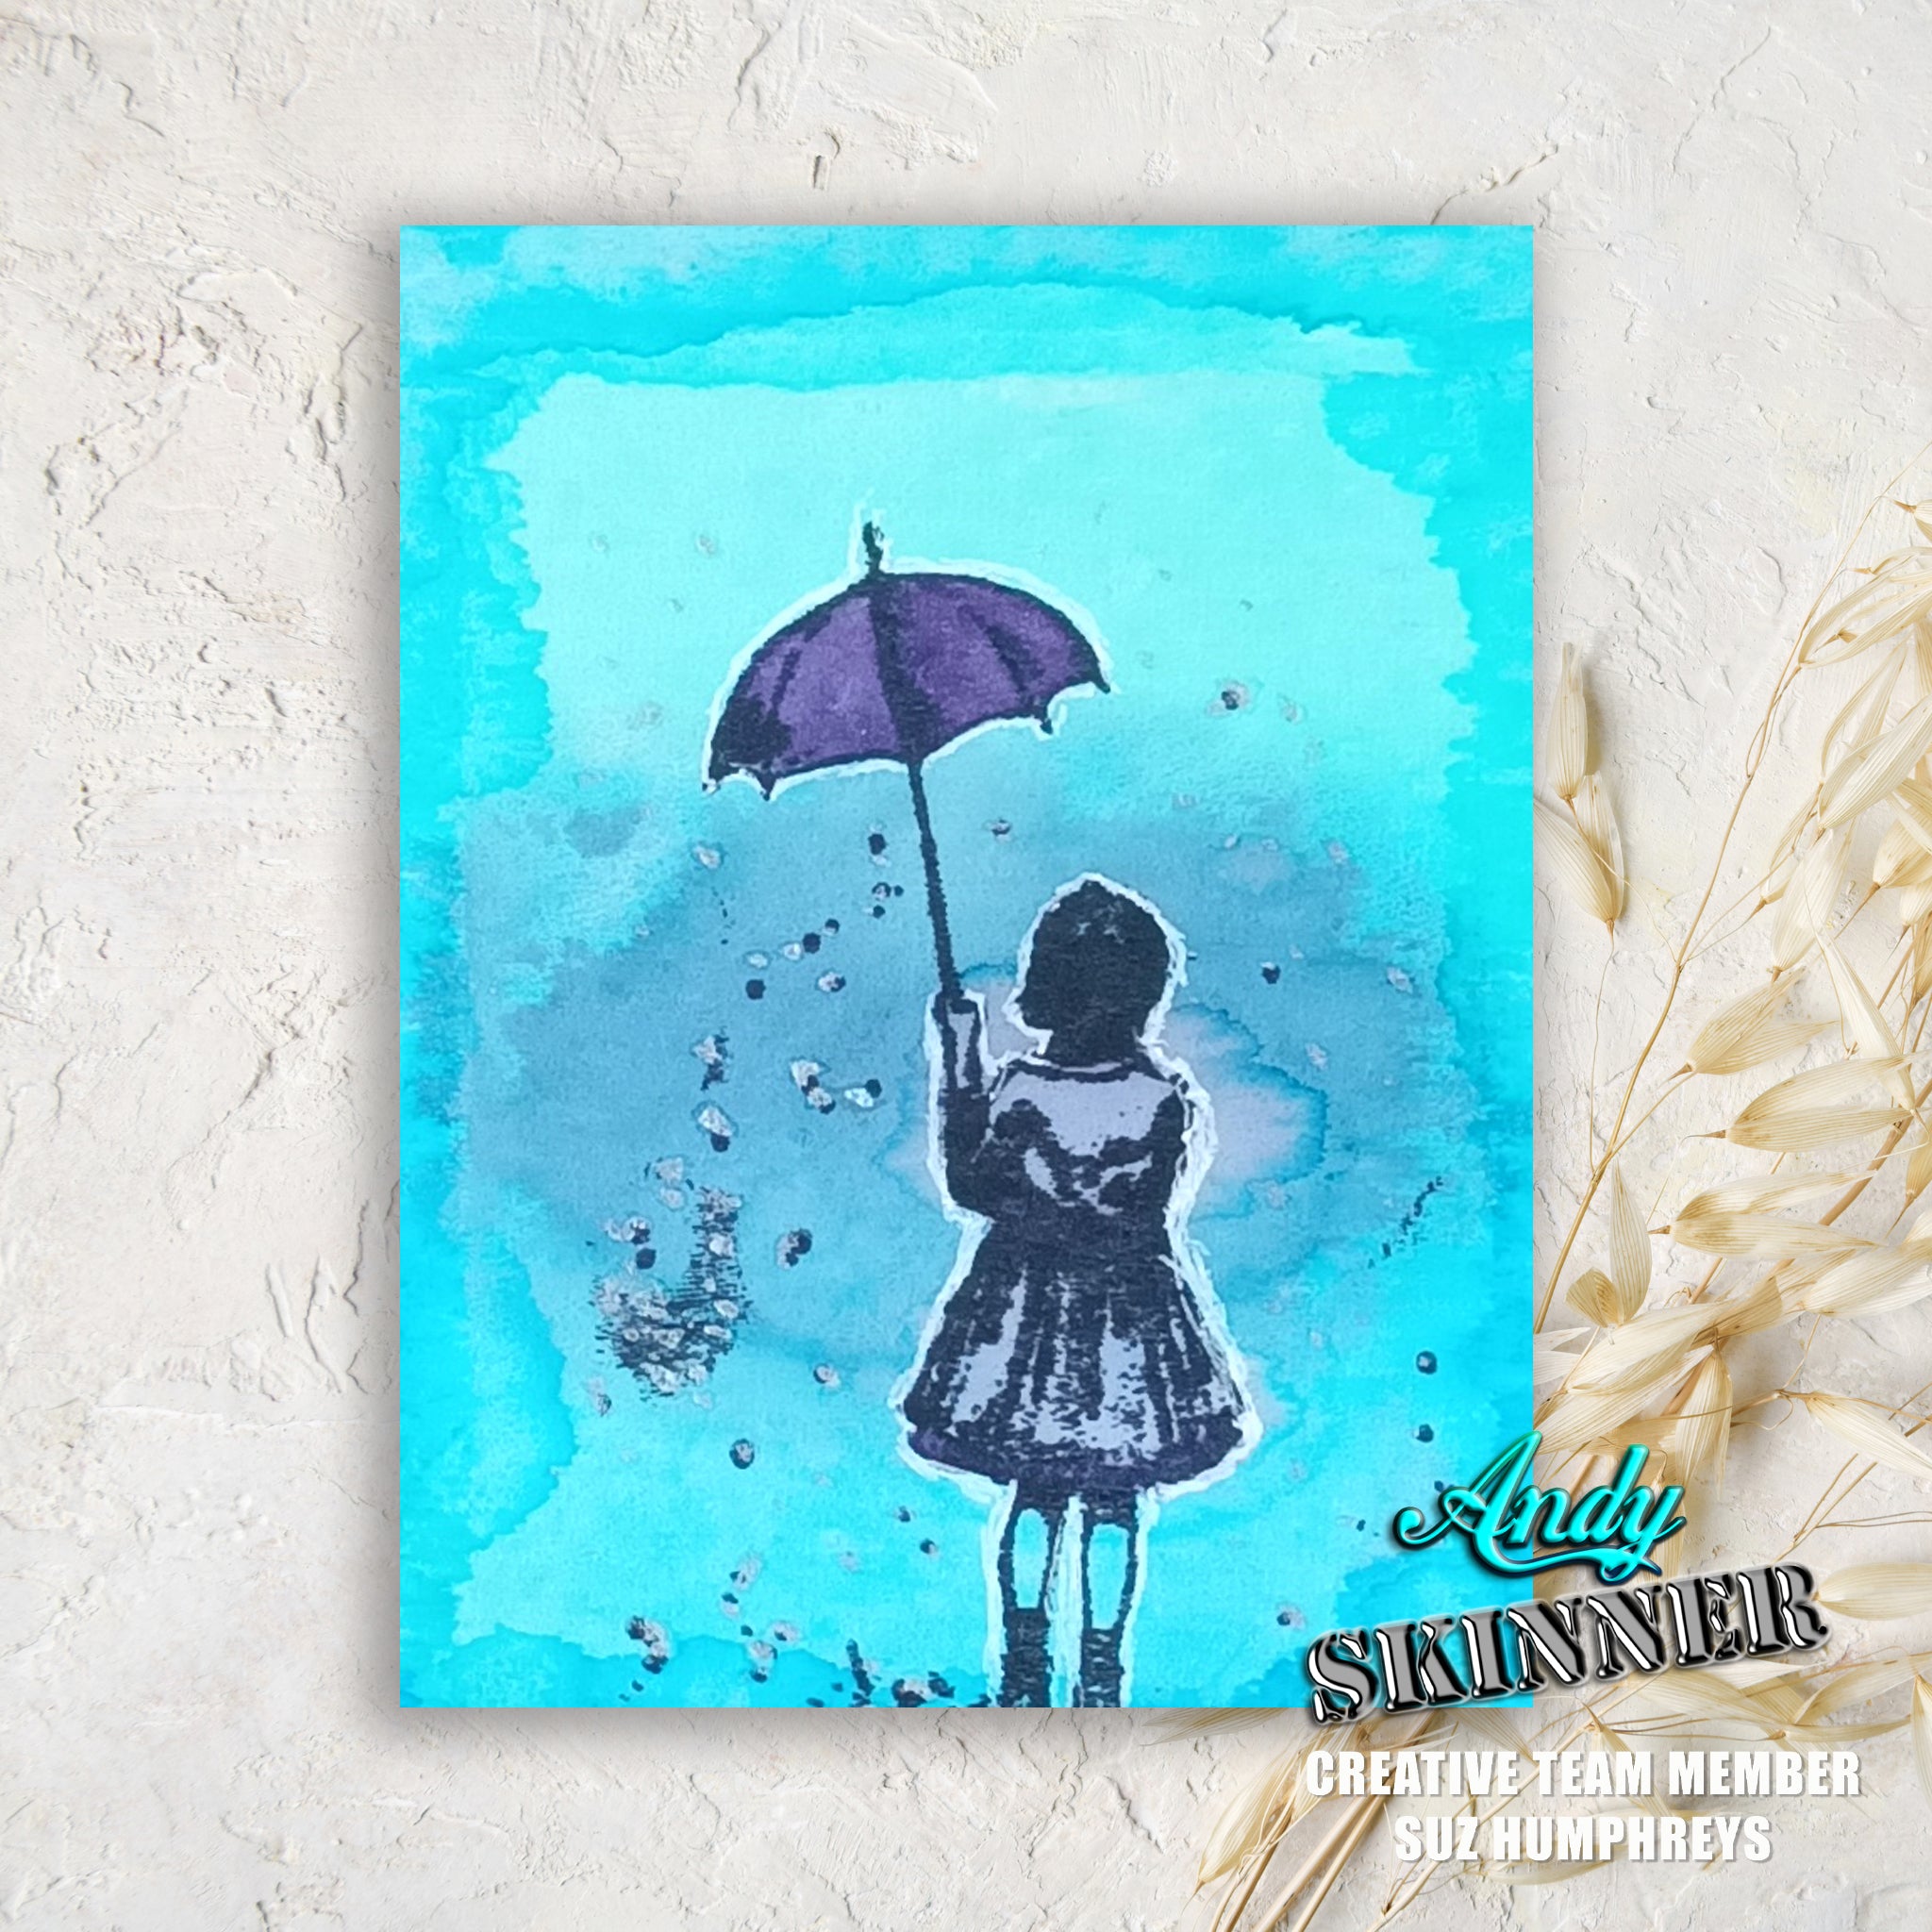 Creative Expressions Andy Skinner I'll Be Your Umbrella 3.5 in x 5.25 in Pre Cut Rubber Stamp